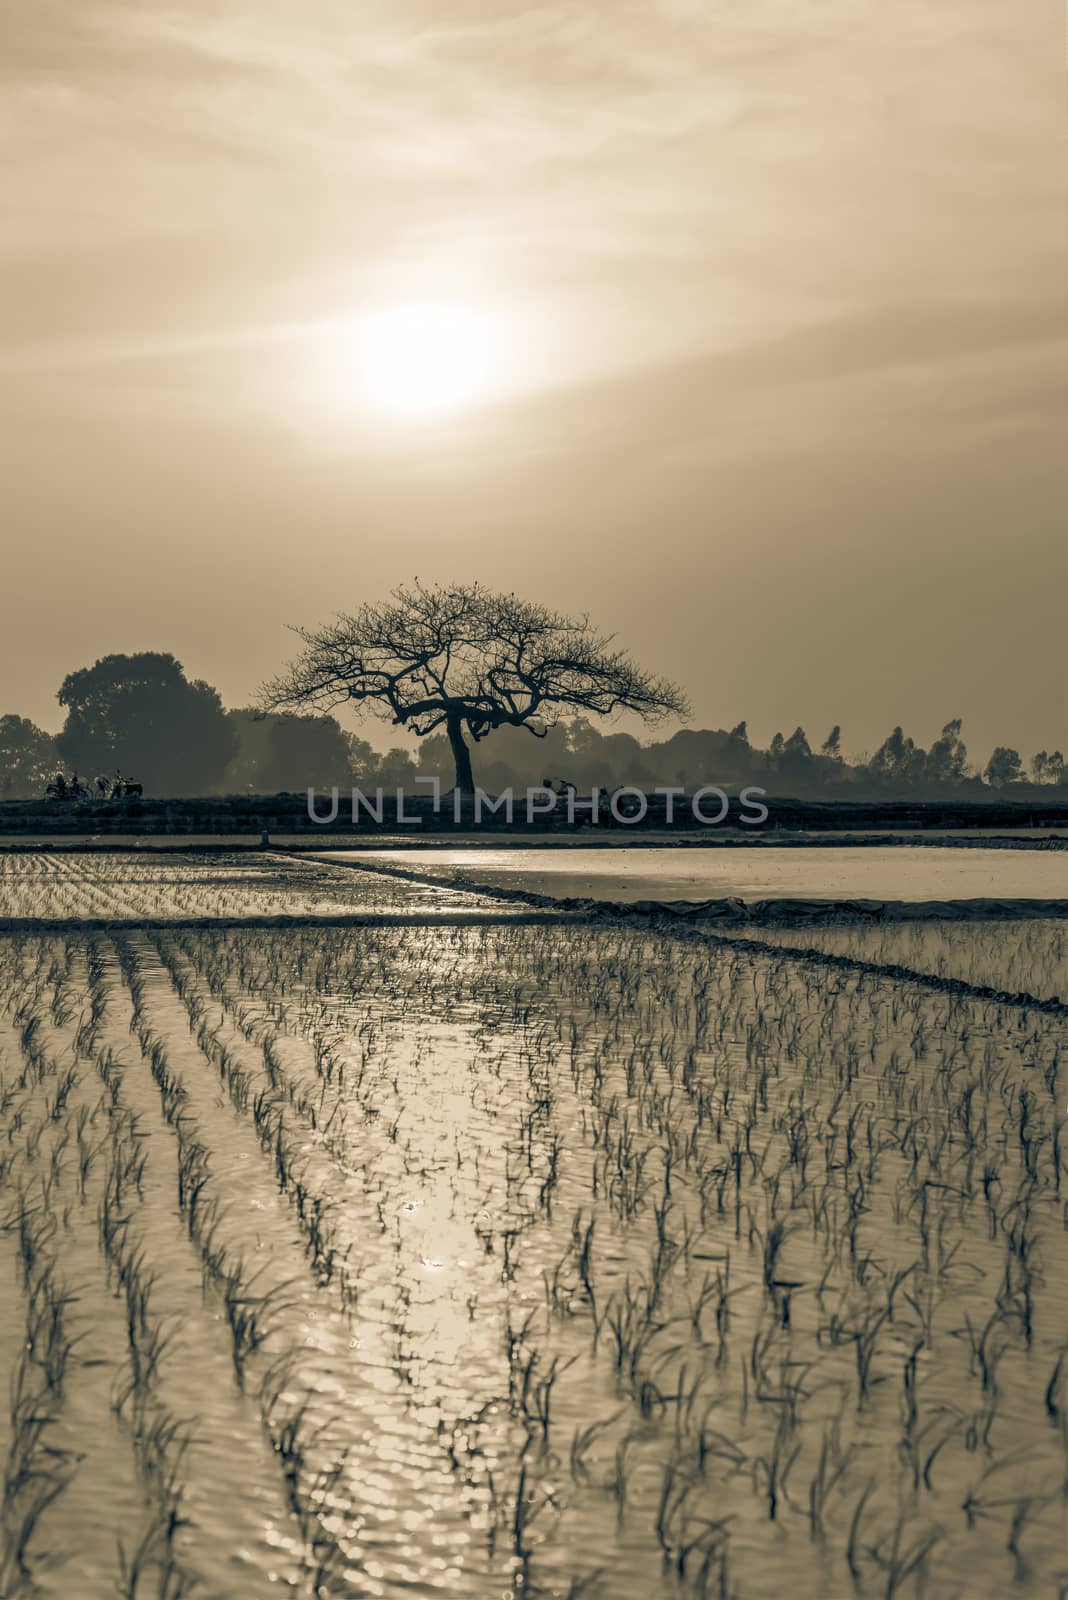 Vintage tone young rice sprouts ready to growing in the rice field in Hanoi, Vietnam. Organic paddy rice farmland at sunset. Terminalia catappa or tropical almond in distance. Agriculture background